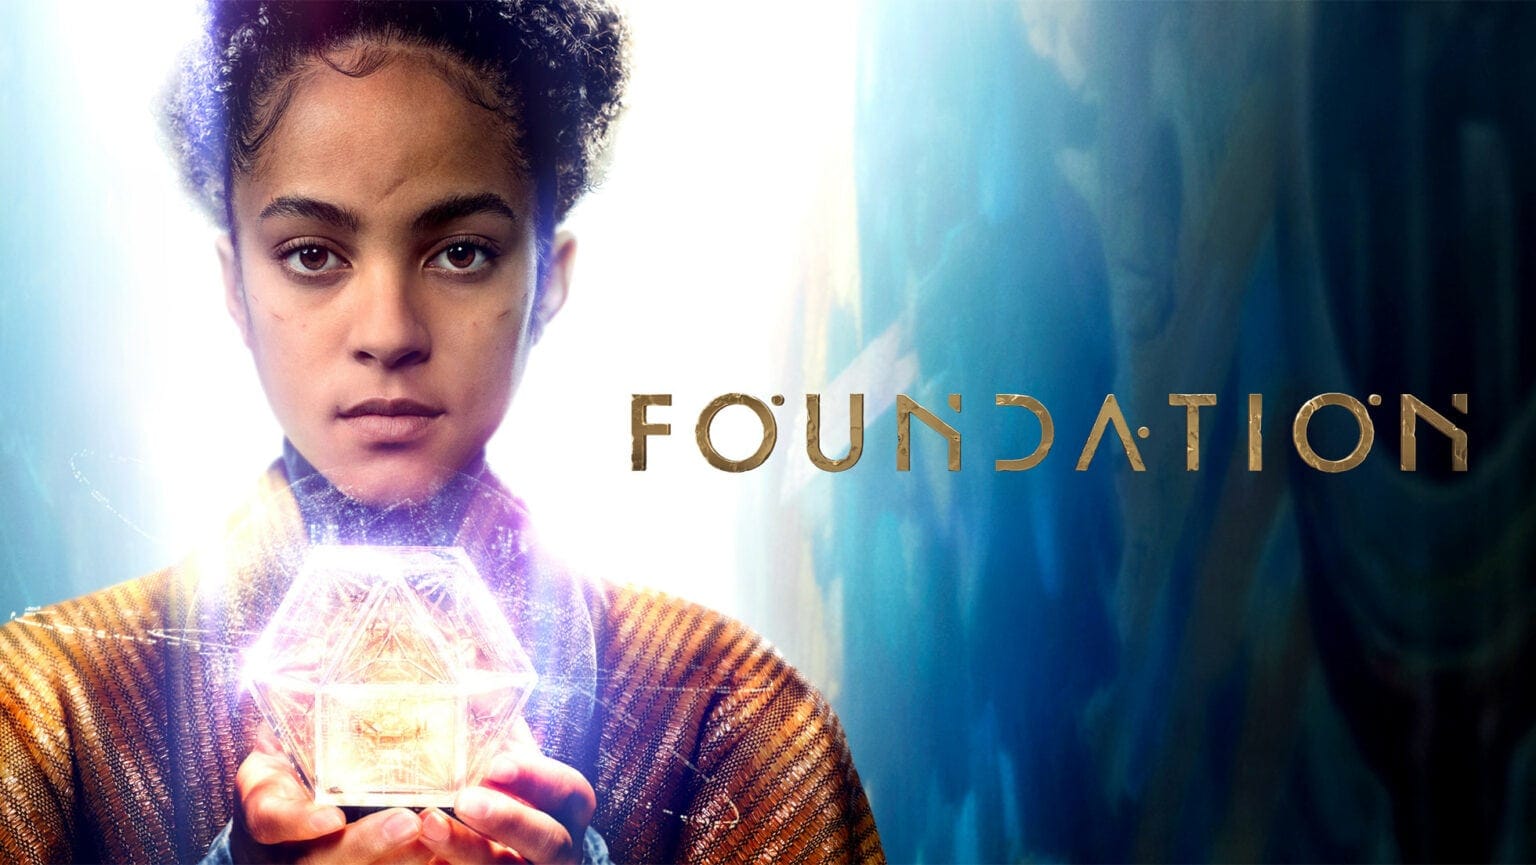 Foundation led the pack for Apple TV+ for visual effects awards nominations.